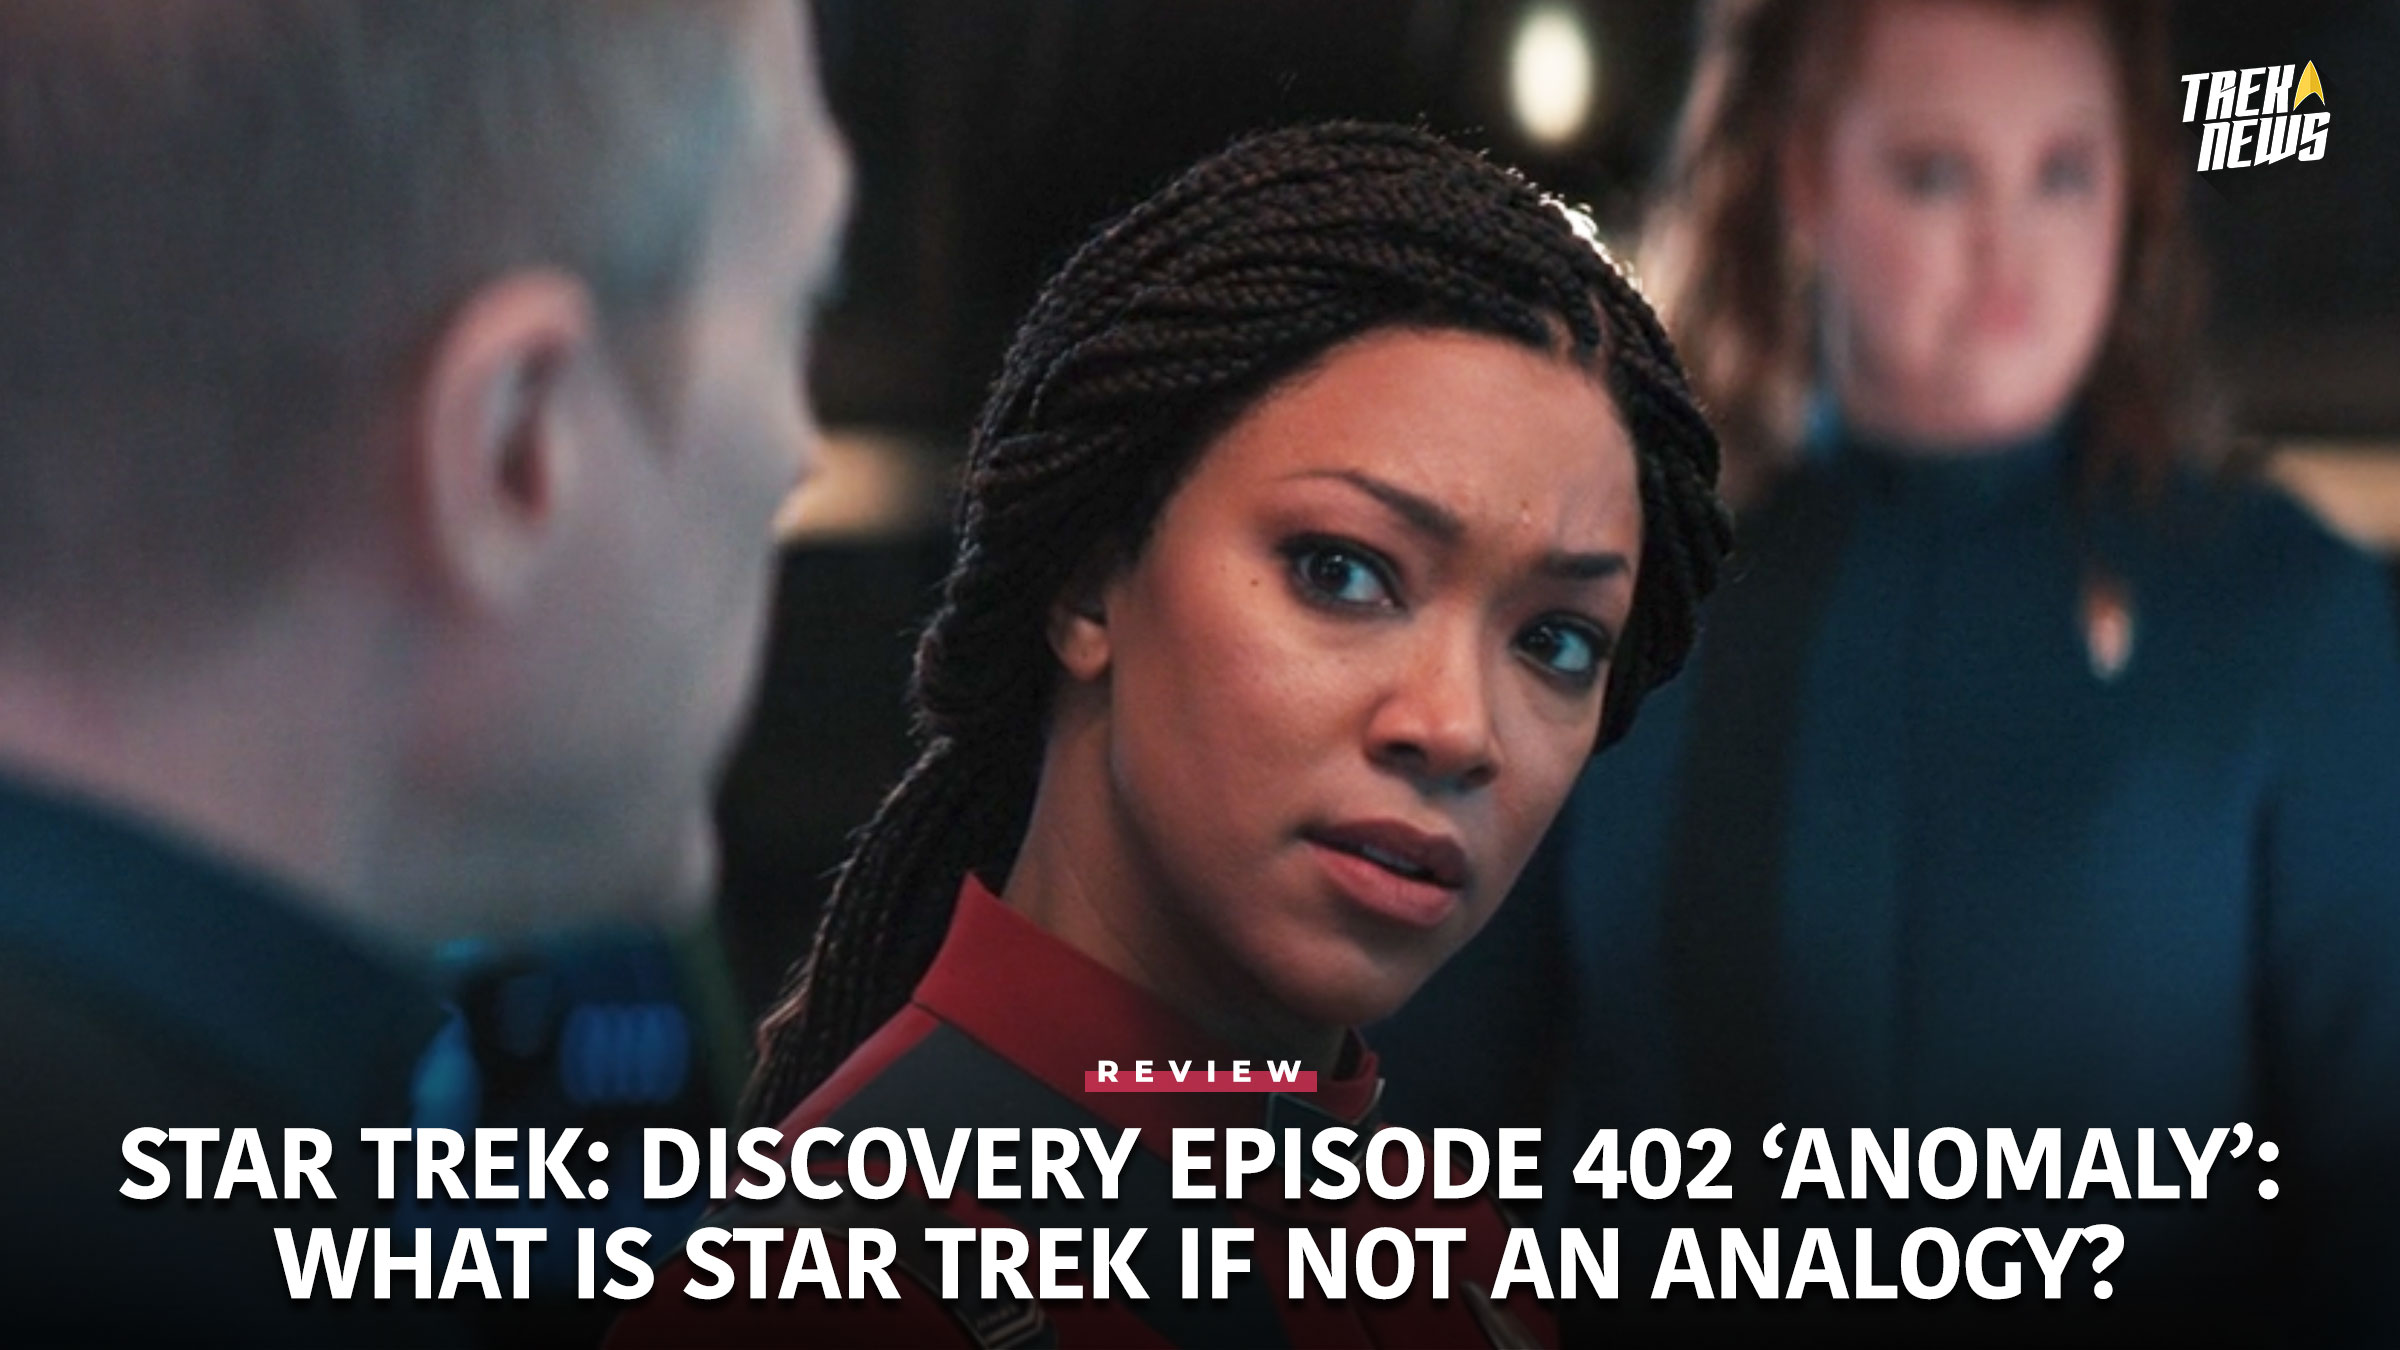 Star Trek: Discovery Episode 402 “Anomaly” Review: What Is Star Trek If Not An Analogy?